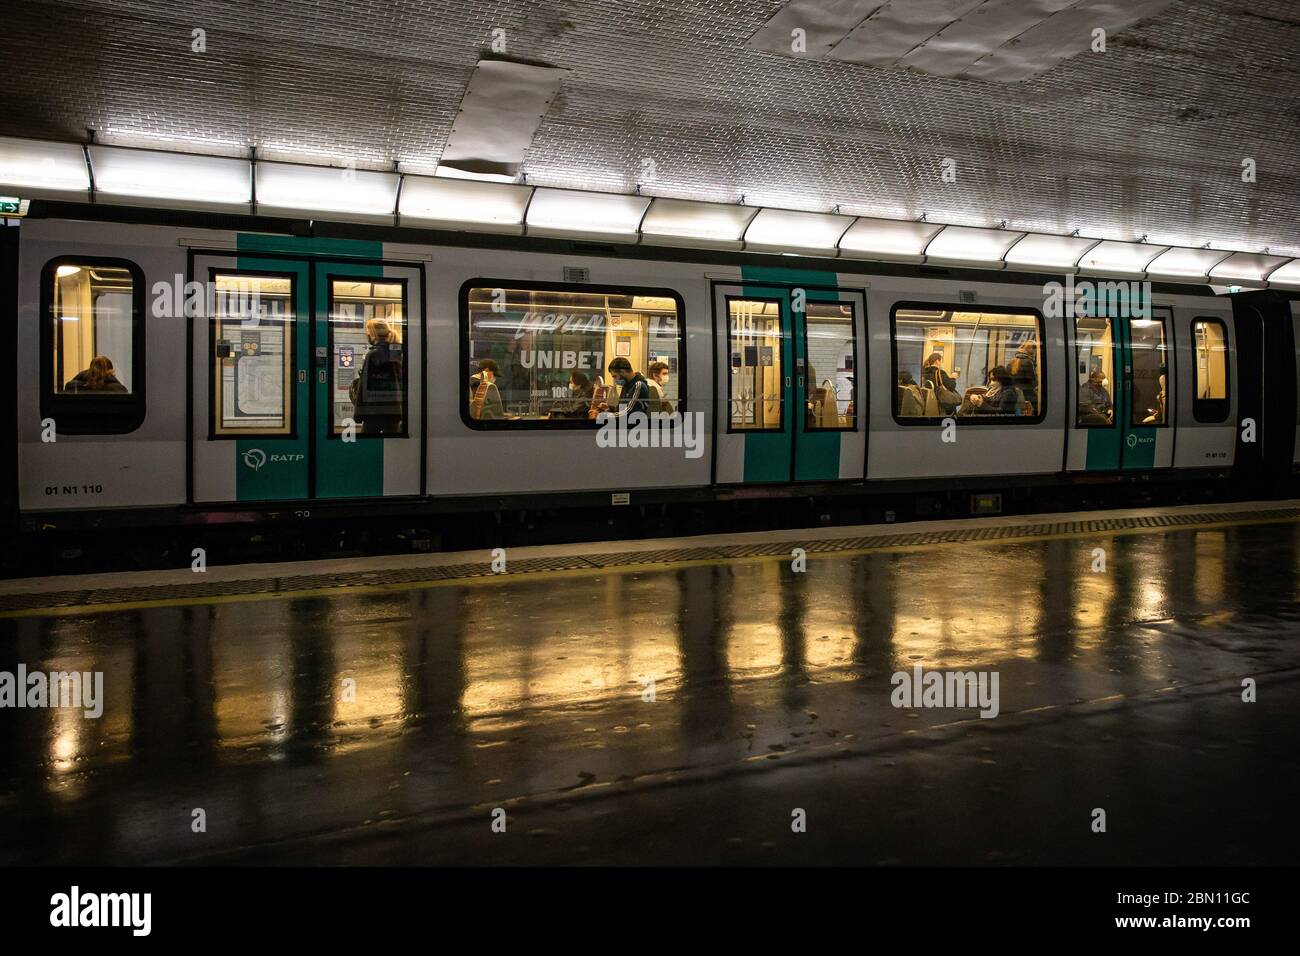 Paris, France. 11th May, 2020. Commuters ride a subway in Paris, France, on May 11, 2020. France on Monday cautiously started a gradual process to return to normalcy, easing some restrictions while maintaining others to avoid a new epidemic wave. Credit: Aurelien Morissard/Xinhua/Alamy Live News Stock Photo